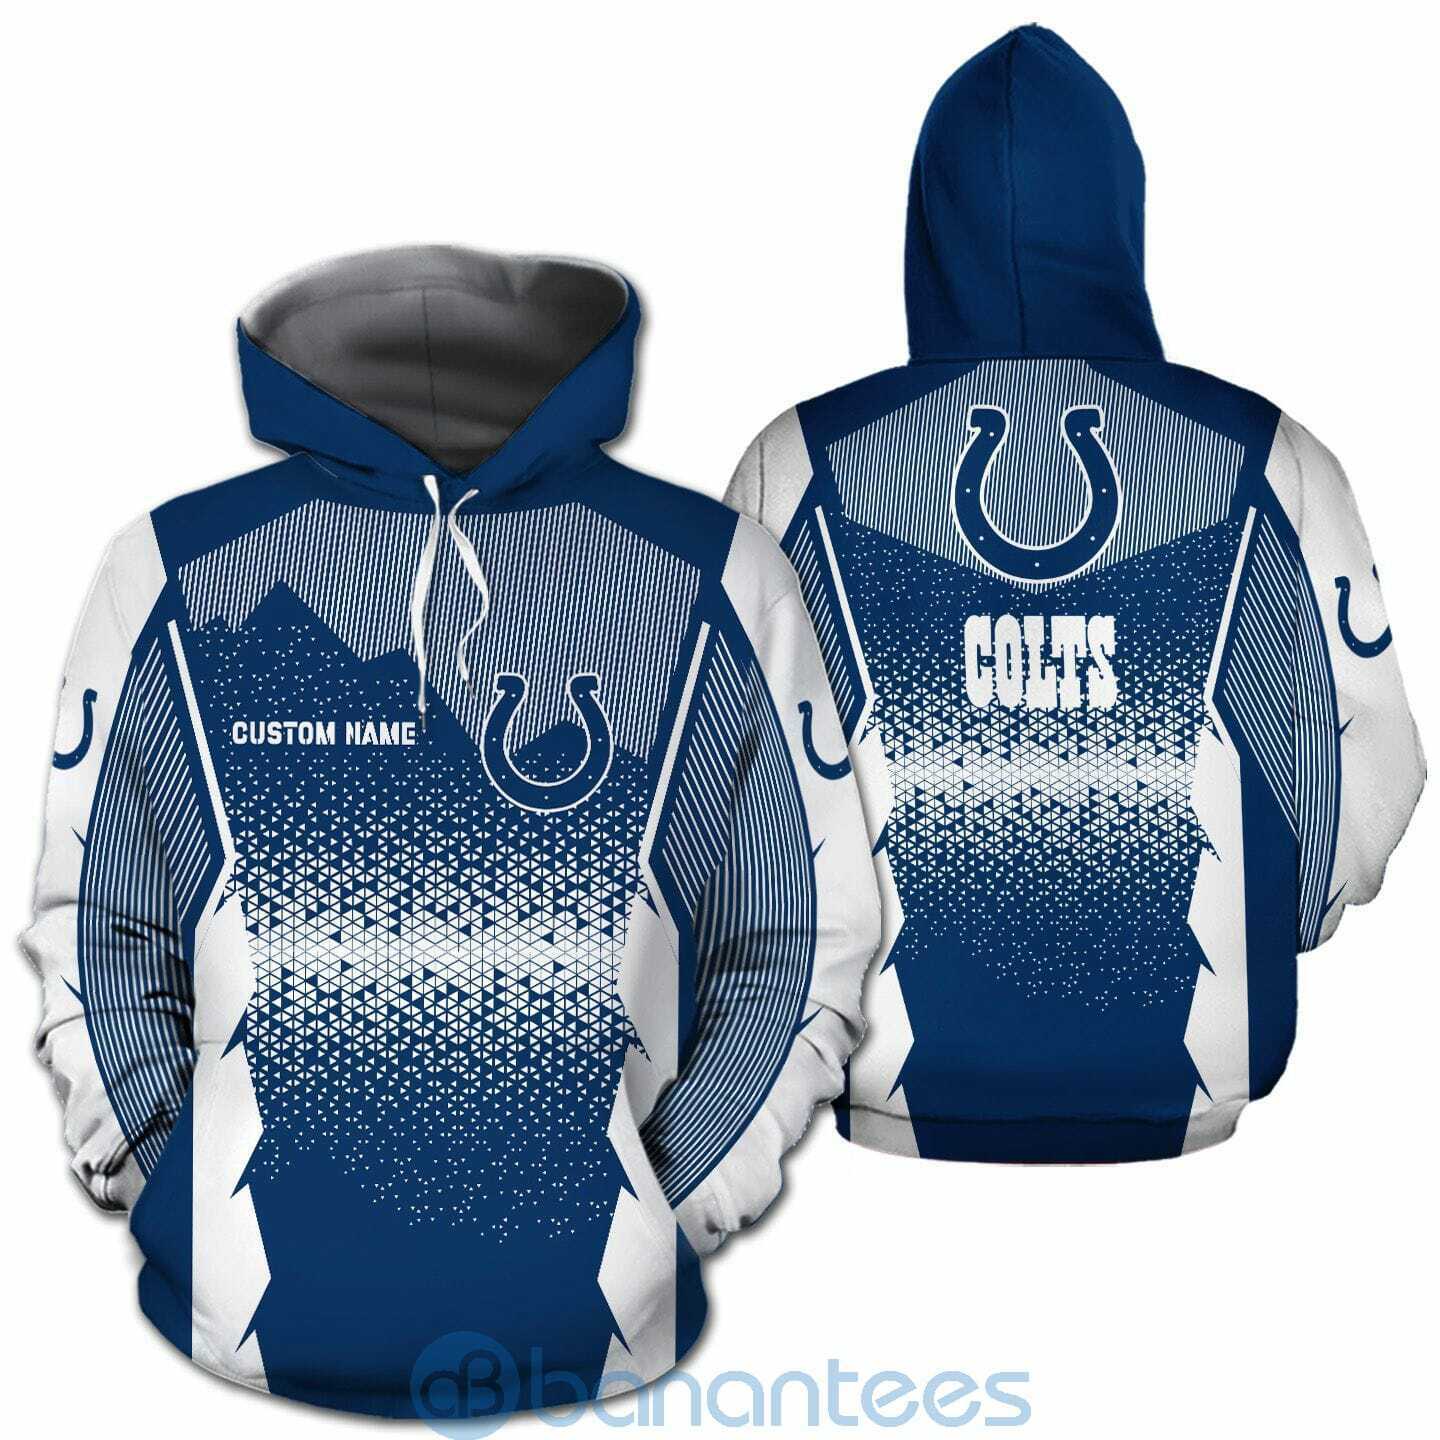 Indianapolis Colts NFL Football Team Custom Name 3D All Over Printed Shirt For Fans